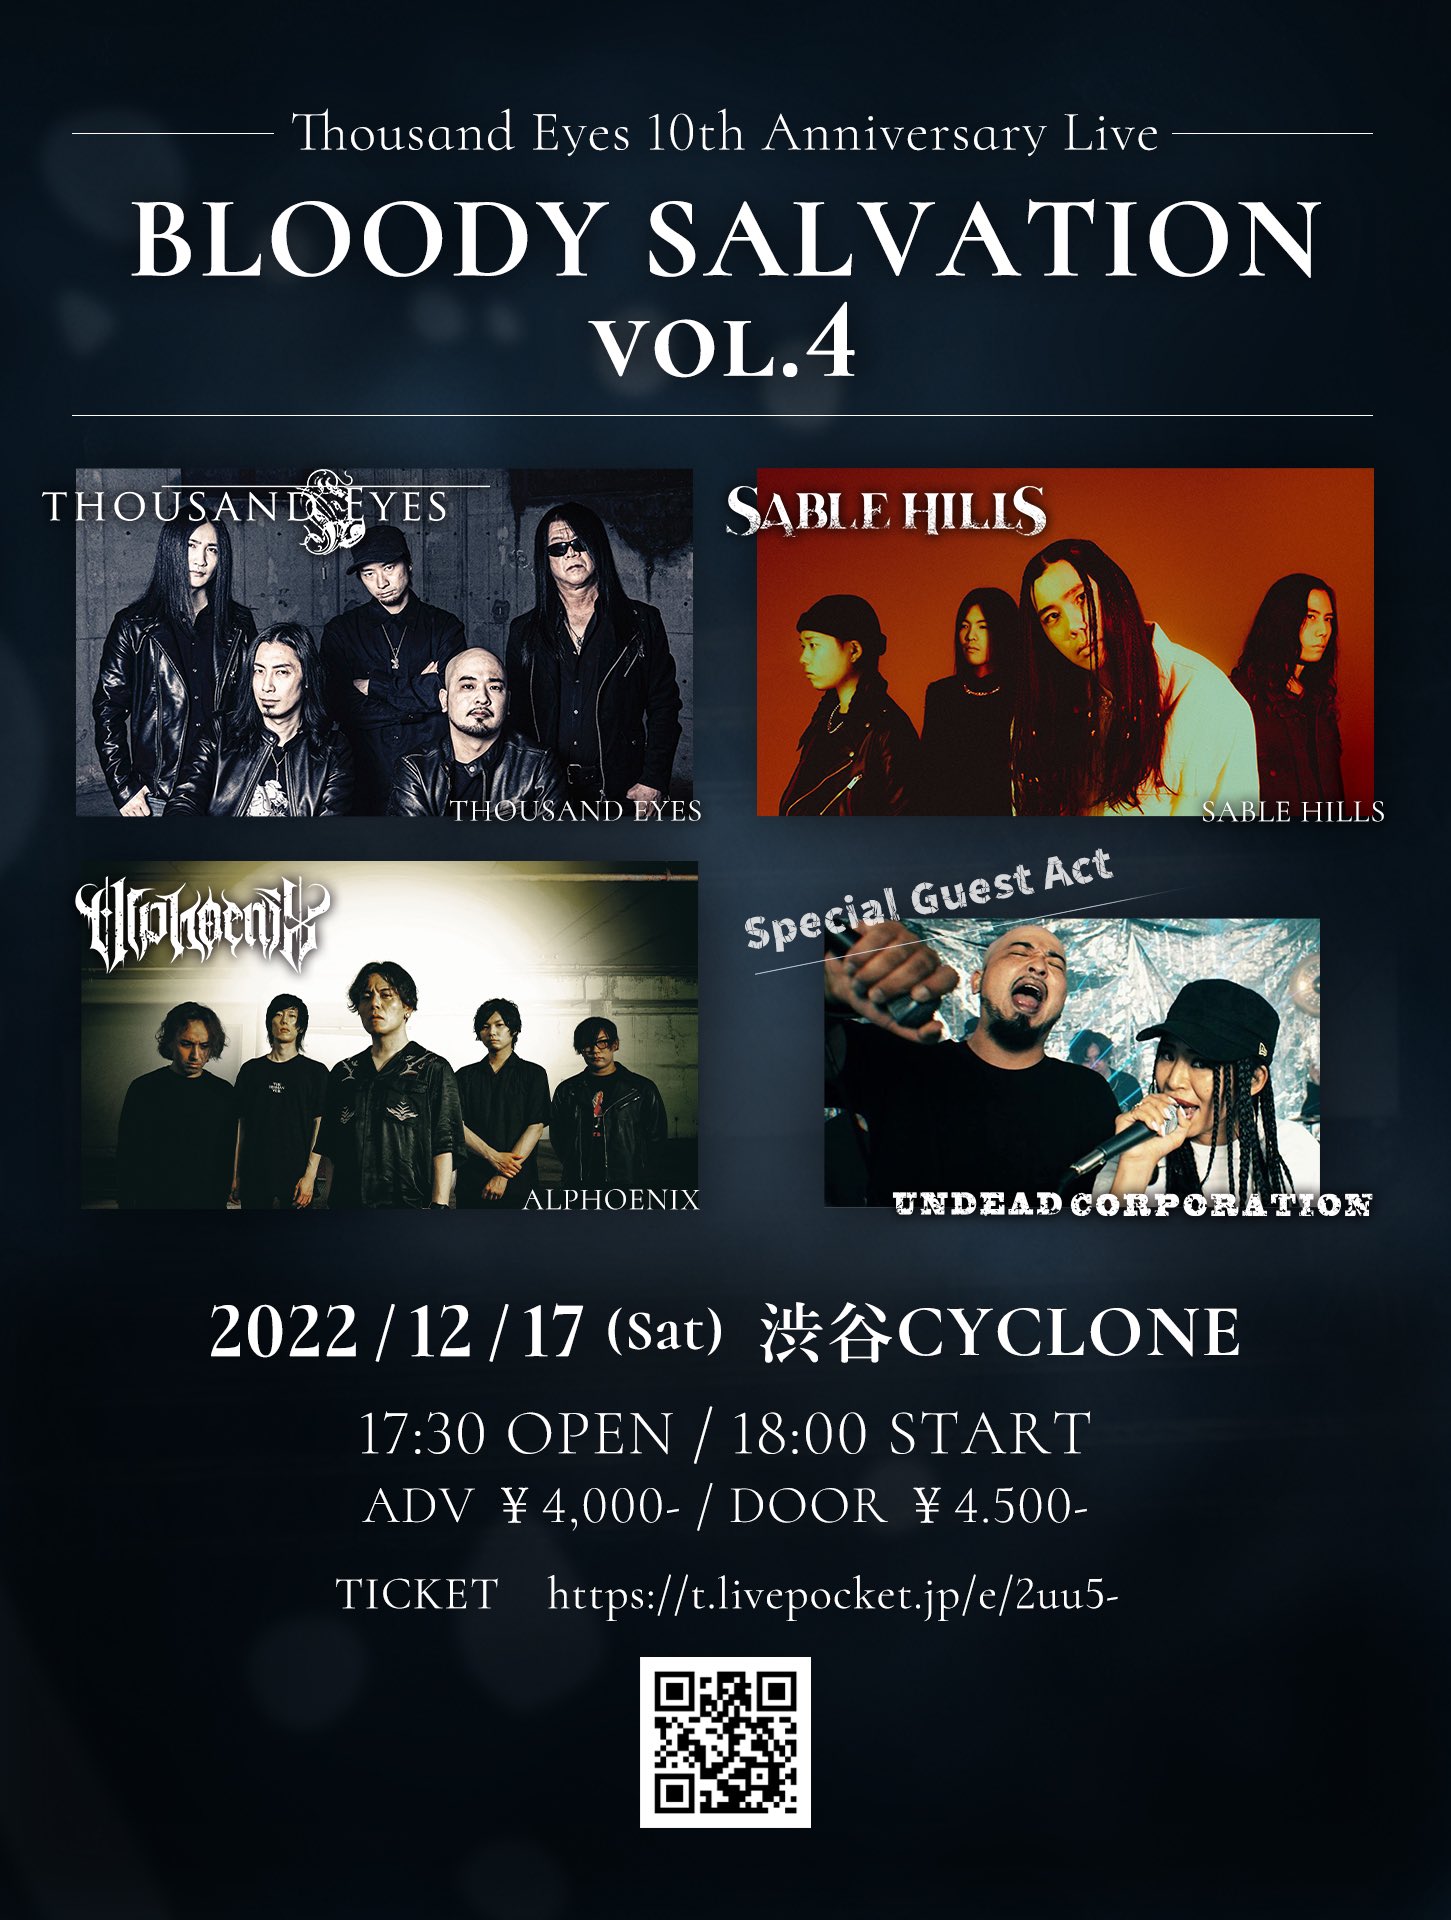 Thousand Eyes 10th Anniversary Bloody Salvation vol.4